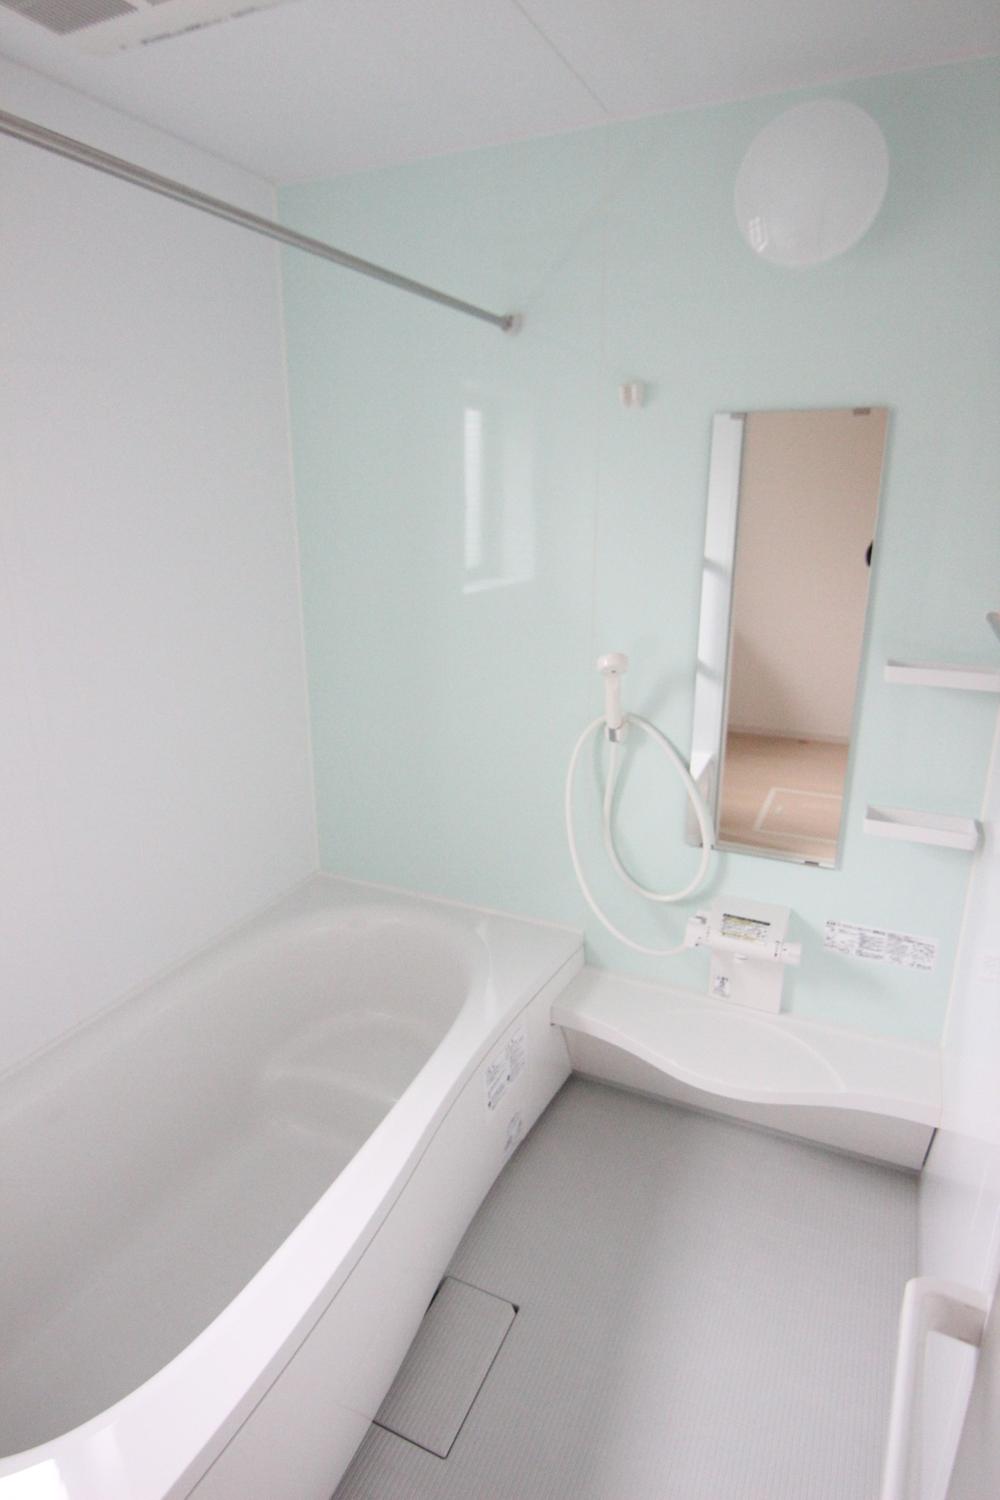 Same specifications photo (bathroom). With (3 Building) same specification ○ bathroom ventilation dryer